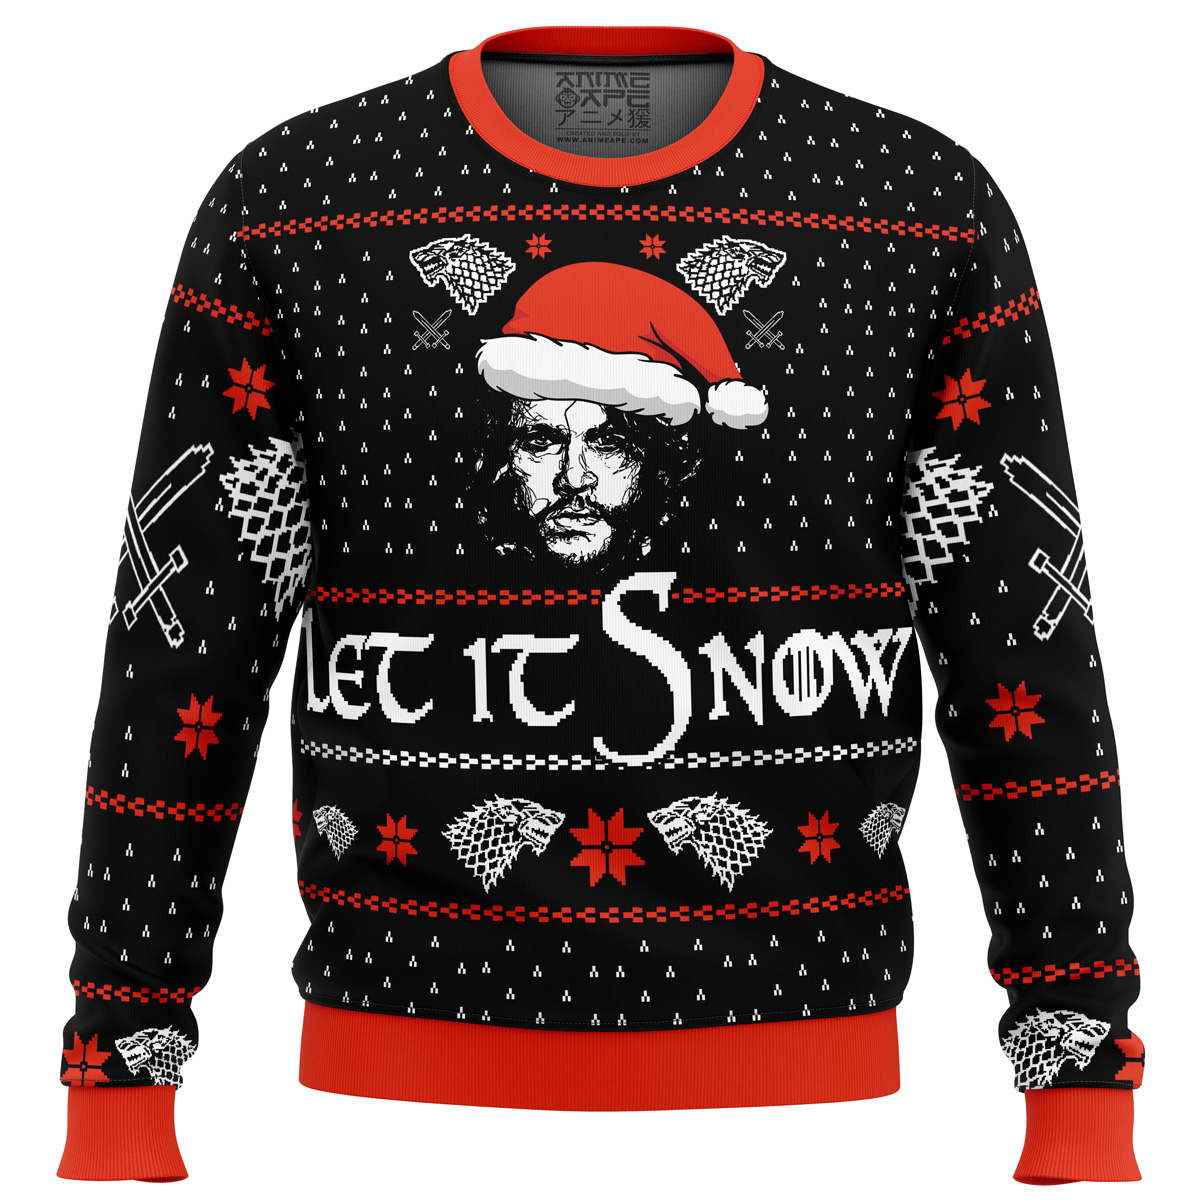 let it snow jon game of thrones ugly christmas sweater ana2207 8651 - Fandomaniax Store